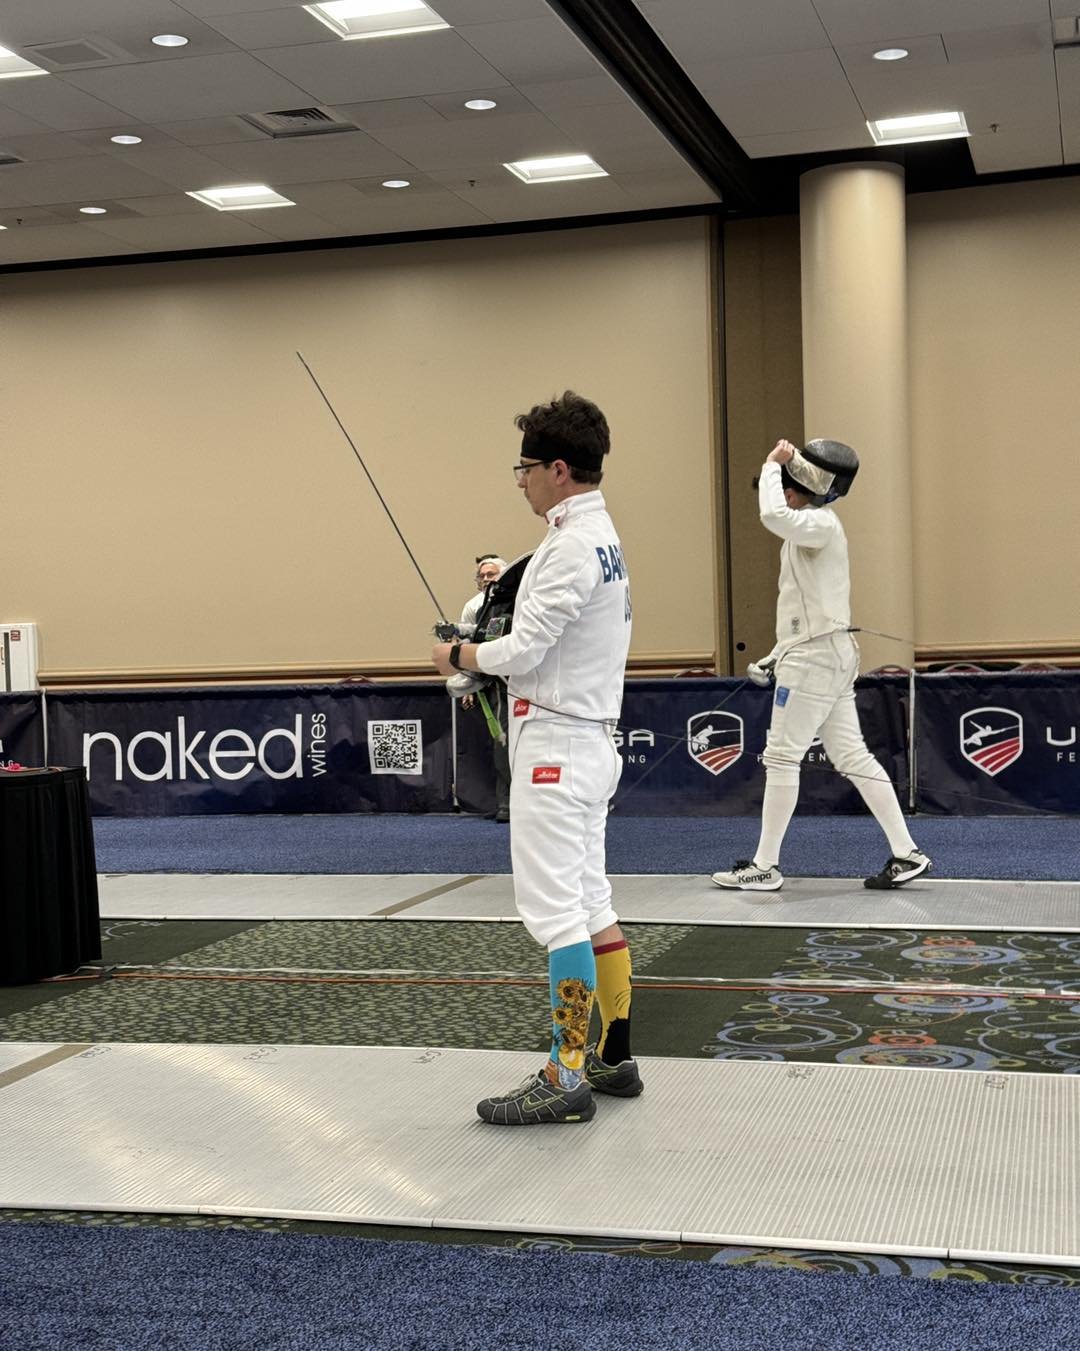 Phil Baranowski had made the top 8 in Vet 40 Men&rsquo;s Epee.  He has won his first National medal and he is still fencing.  Go Phil!